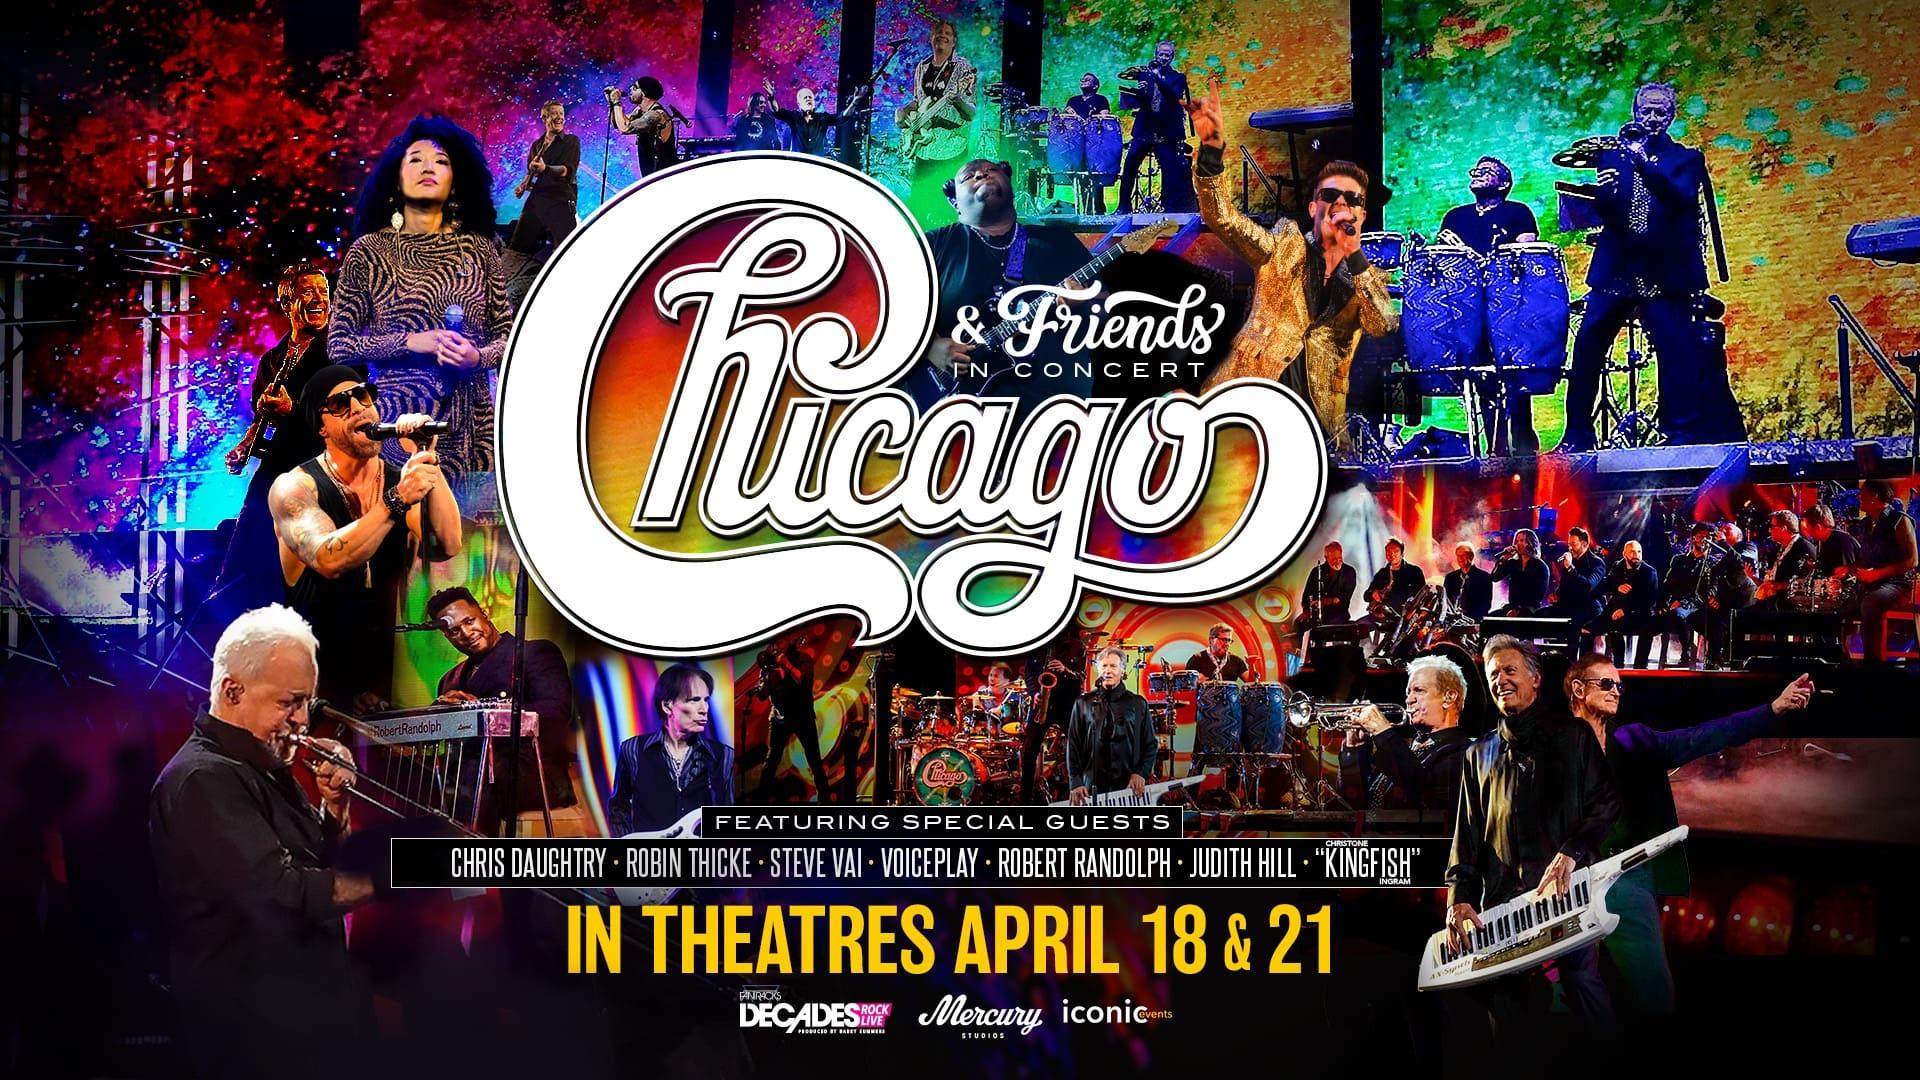 Chicago & Friends in Concert backdrop